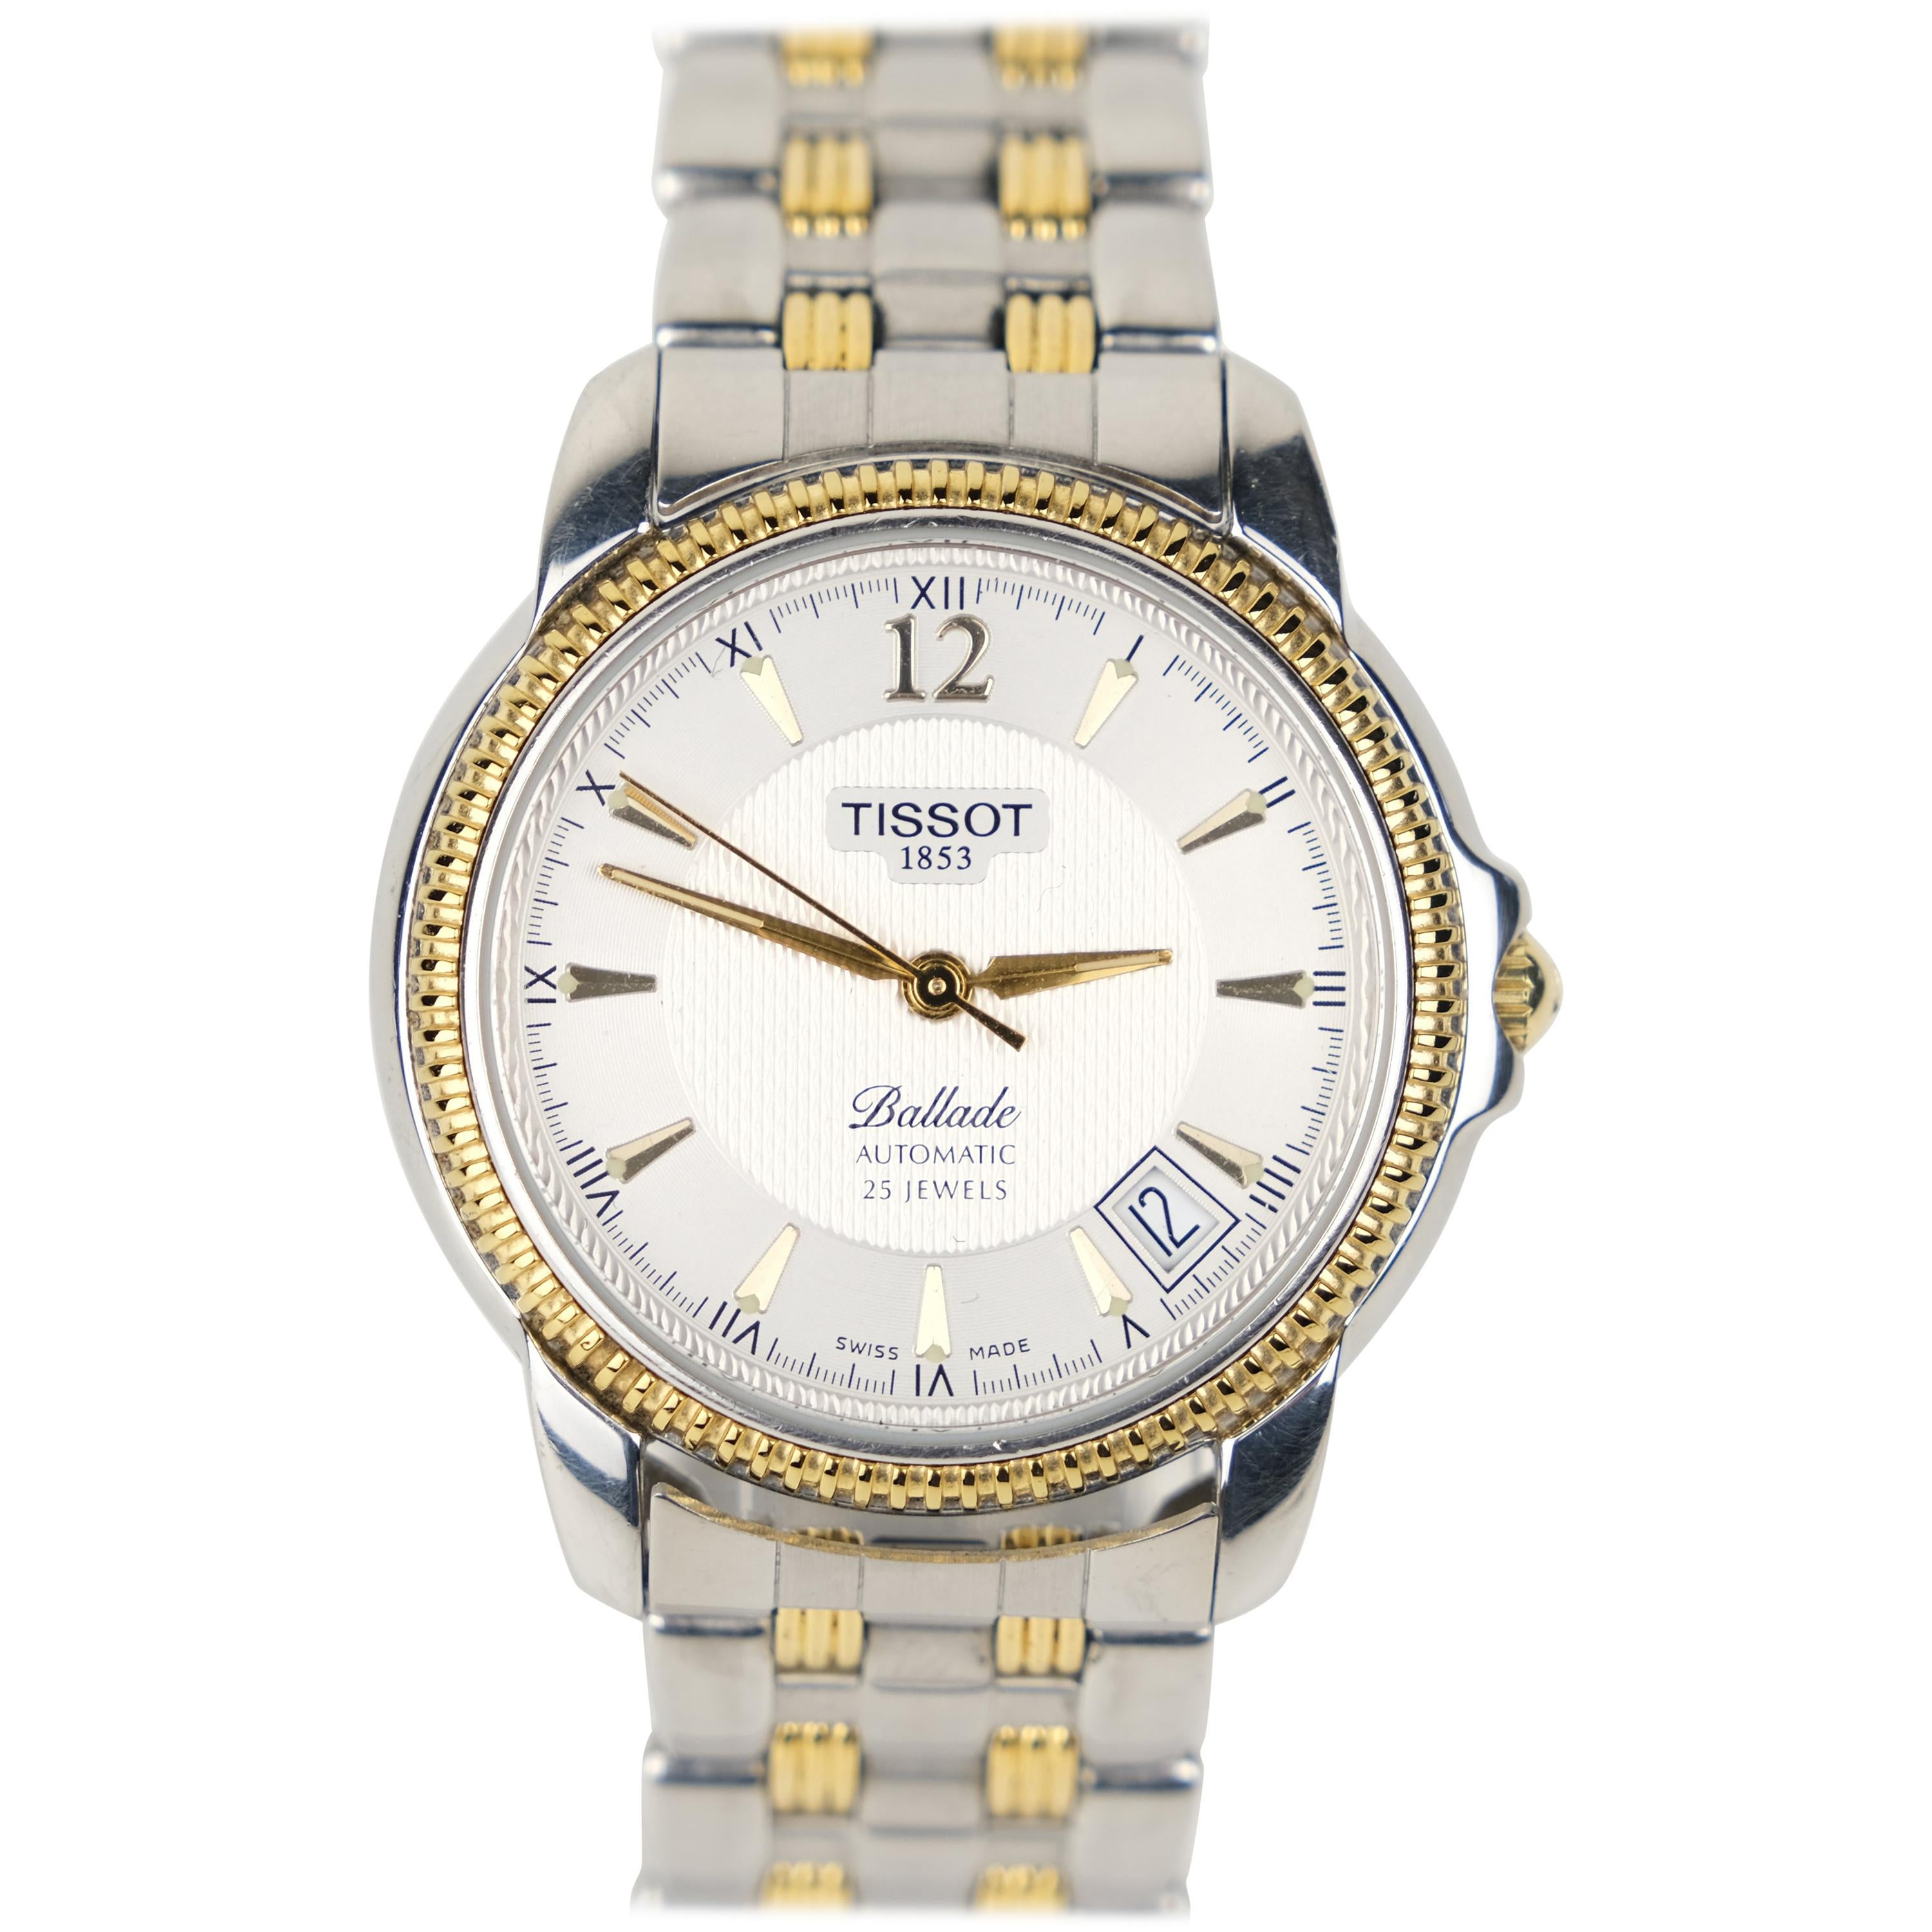 Tissot "Ballade" Exhibition Back Two-Tone Stainless Steel Automatic Wristwatch